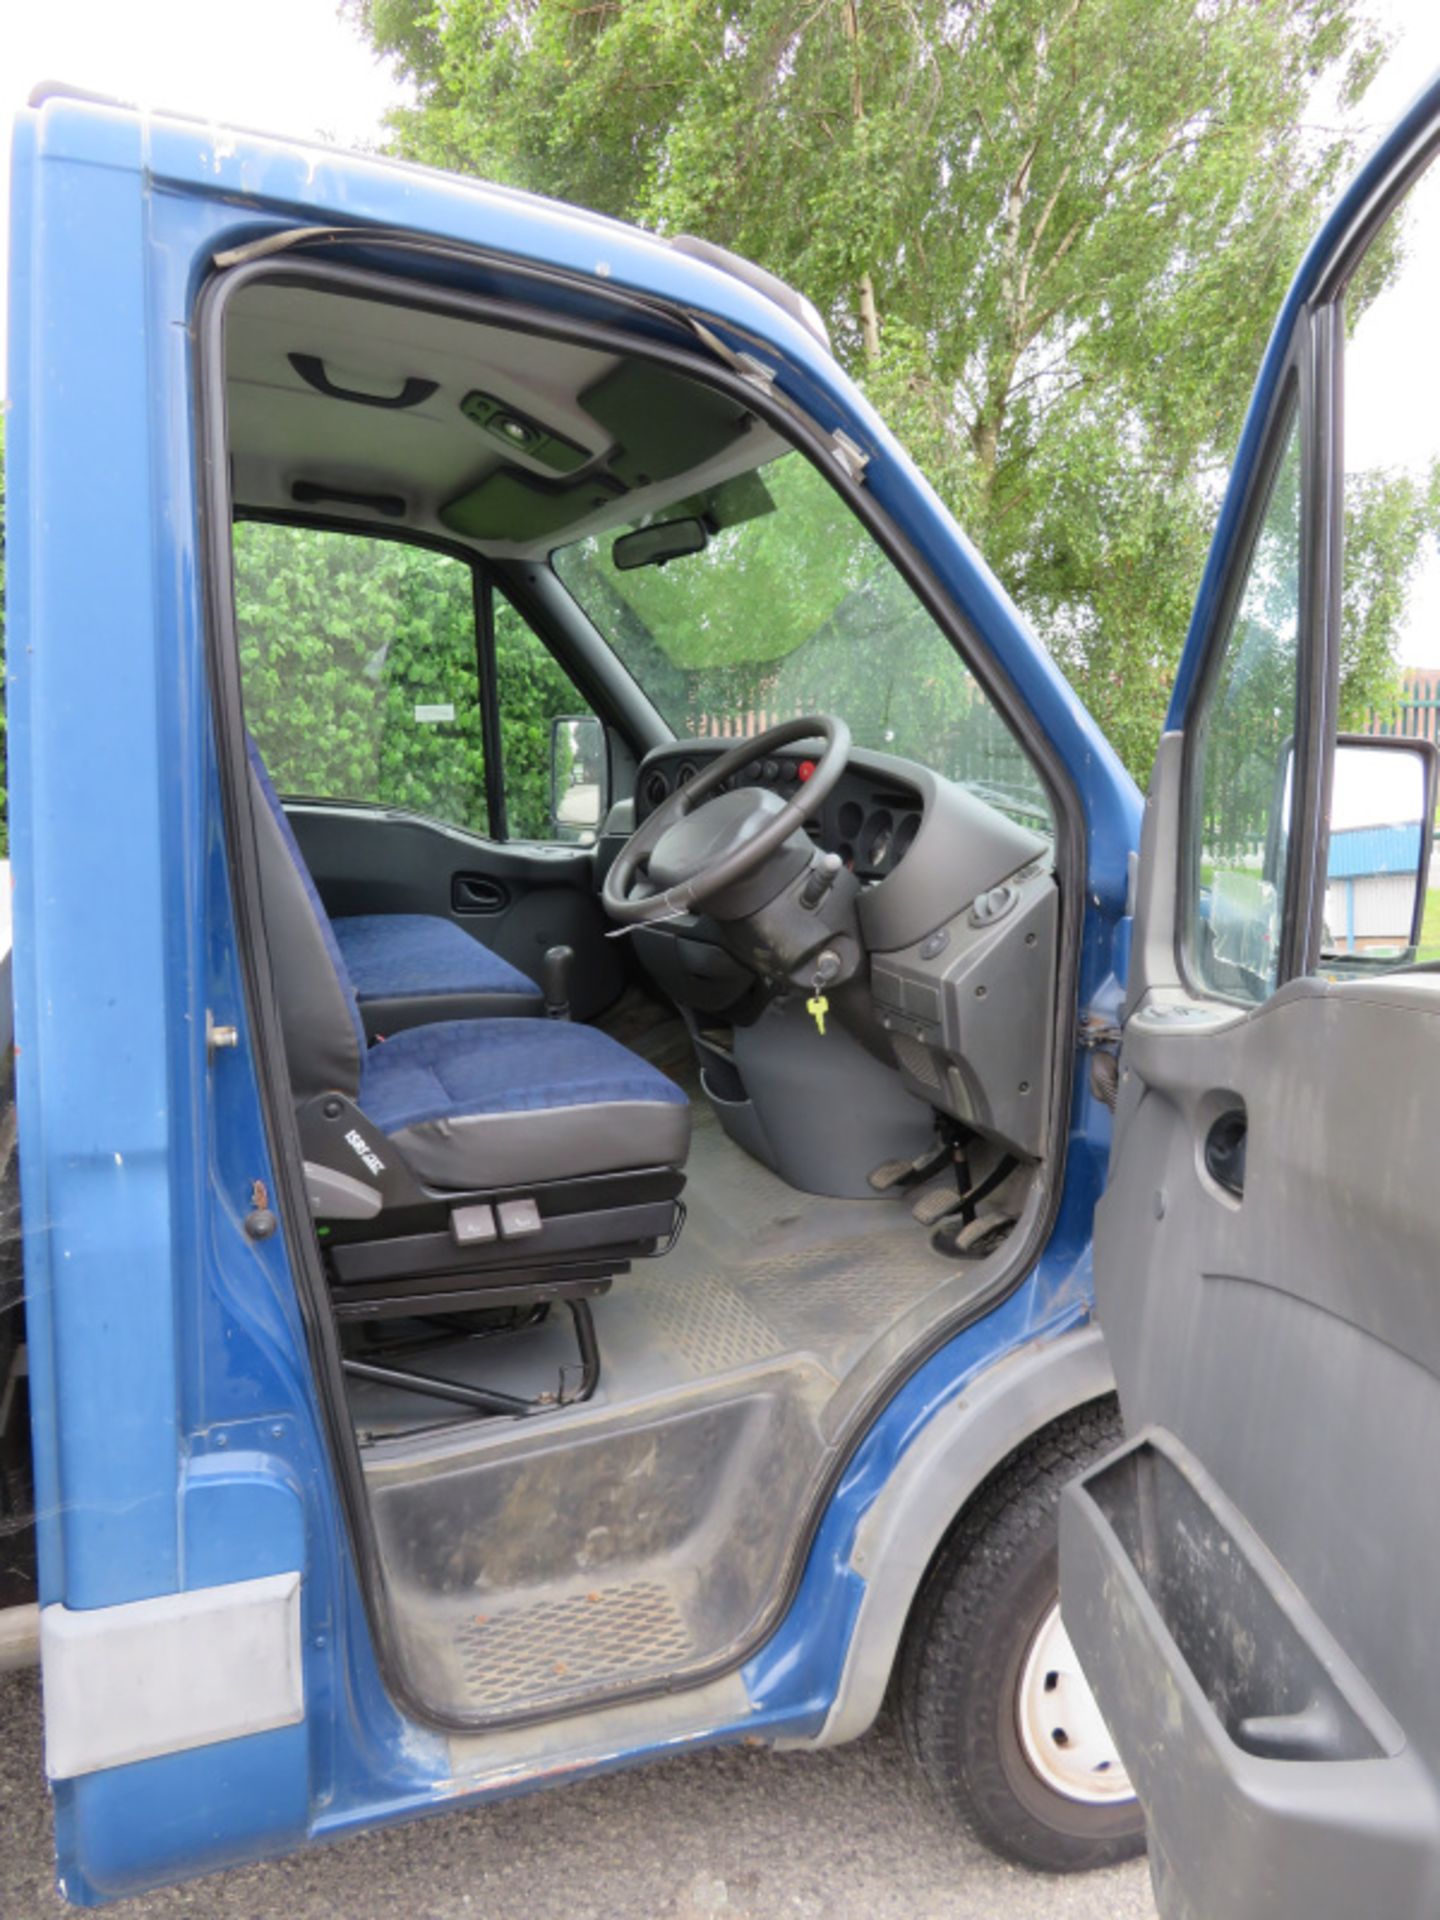 Iveco Daily drop side truck- 29L9 - diesel - year 2004 - 4 cylinder engine - Image 7 of 15